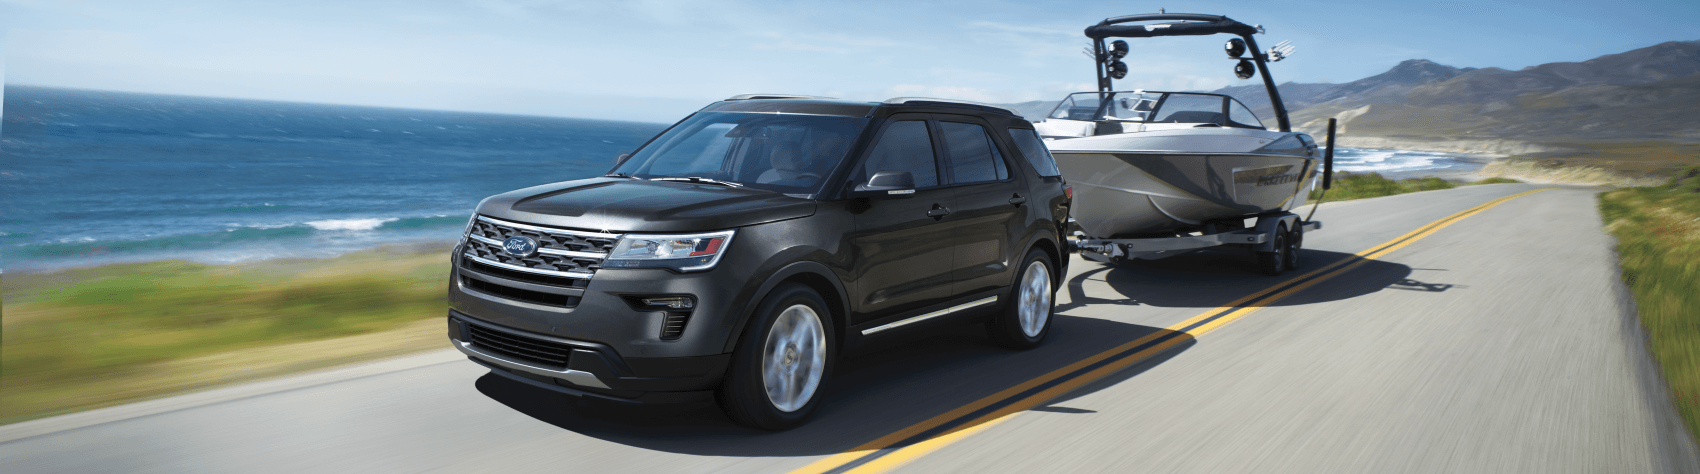 Used 2019 Ford Explorer XLT Towing Boat